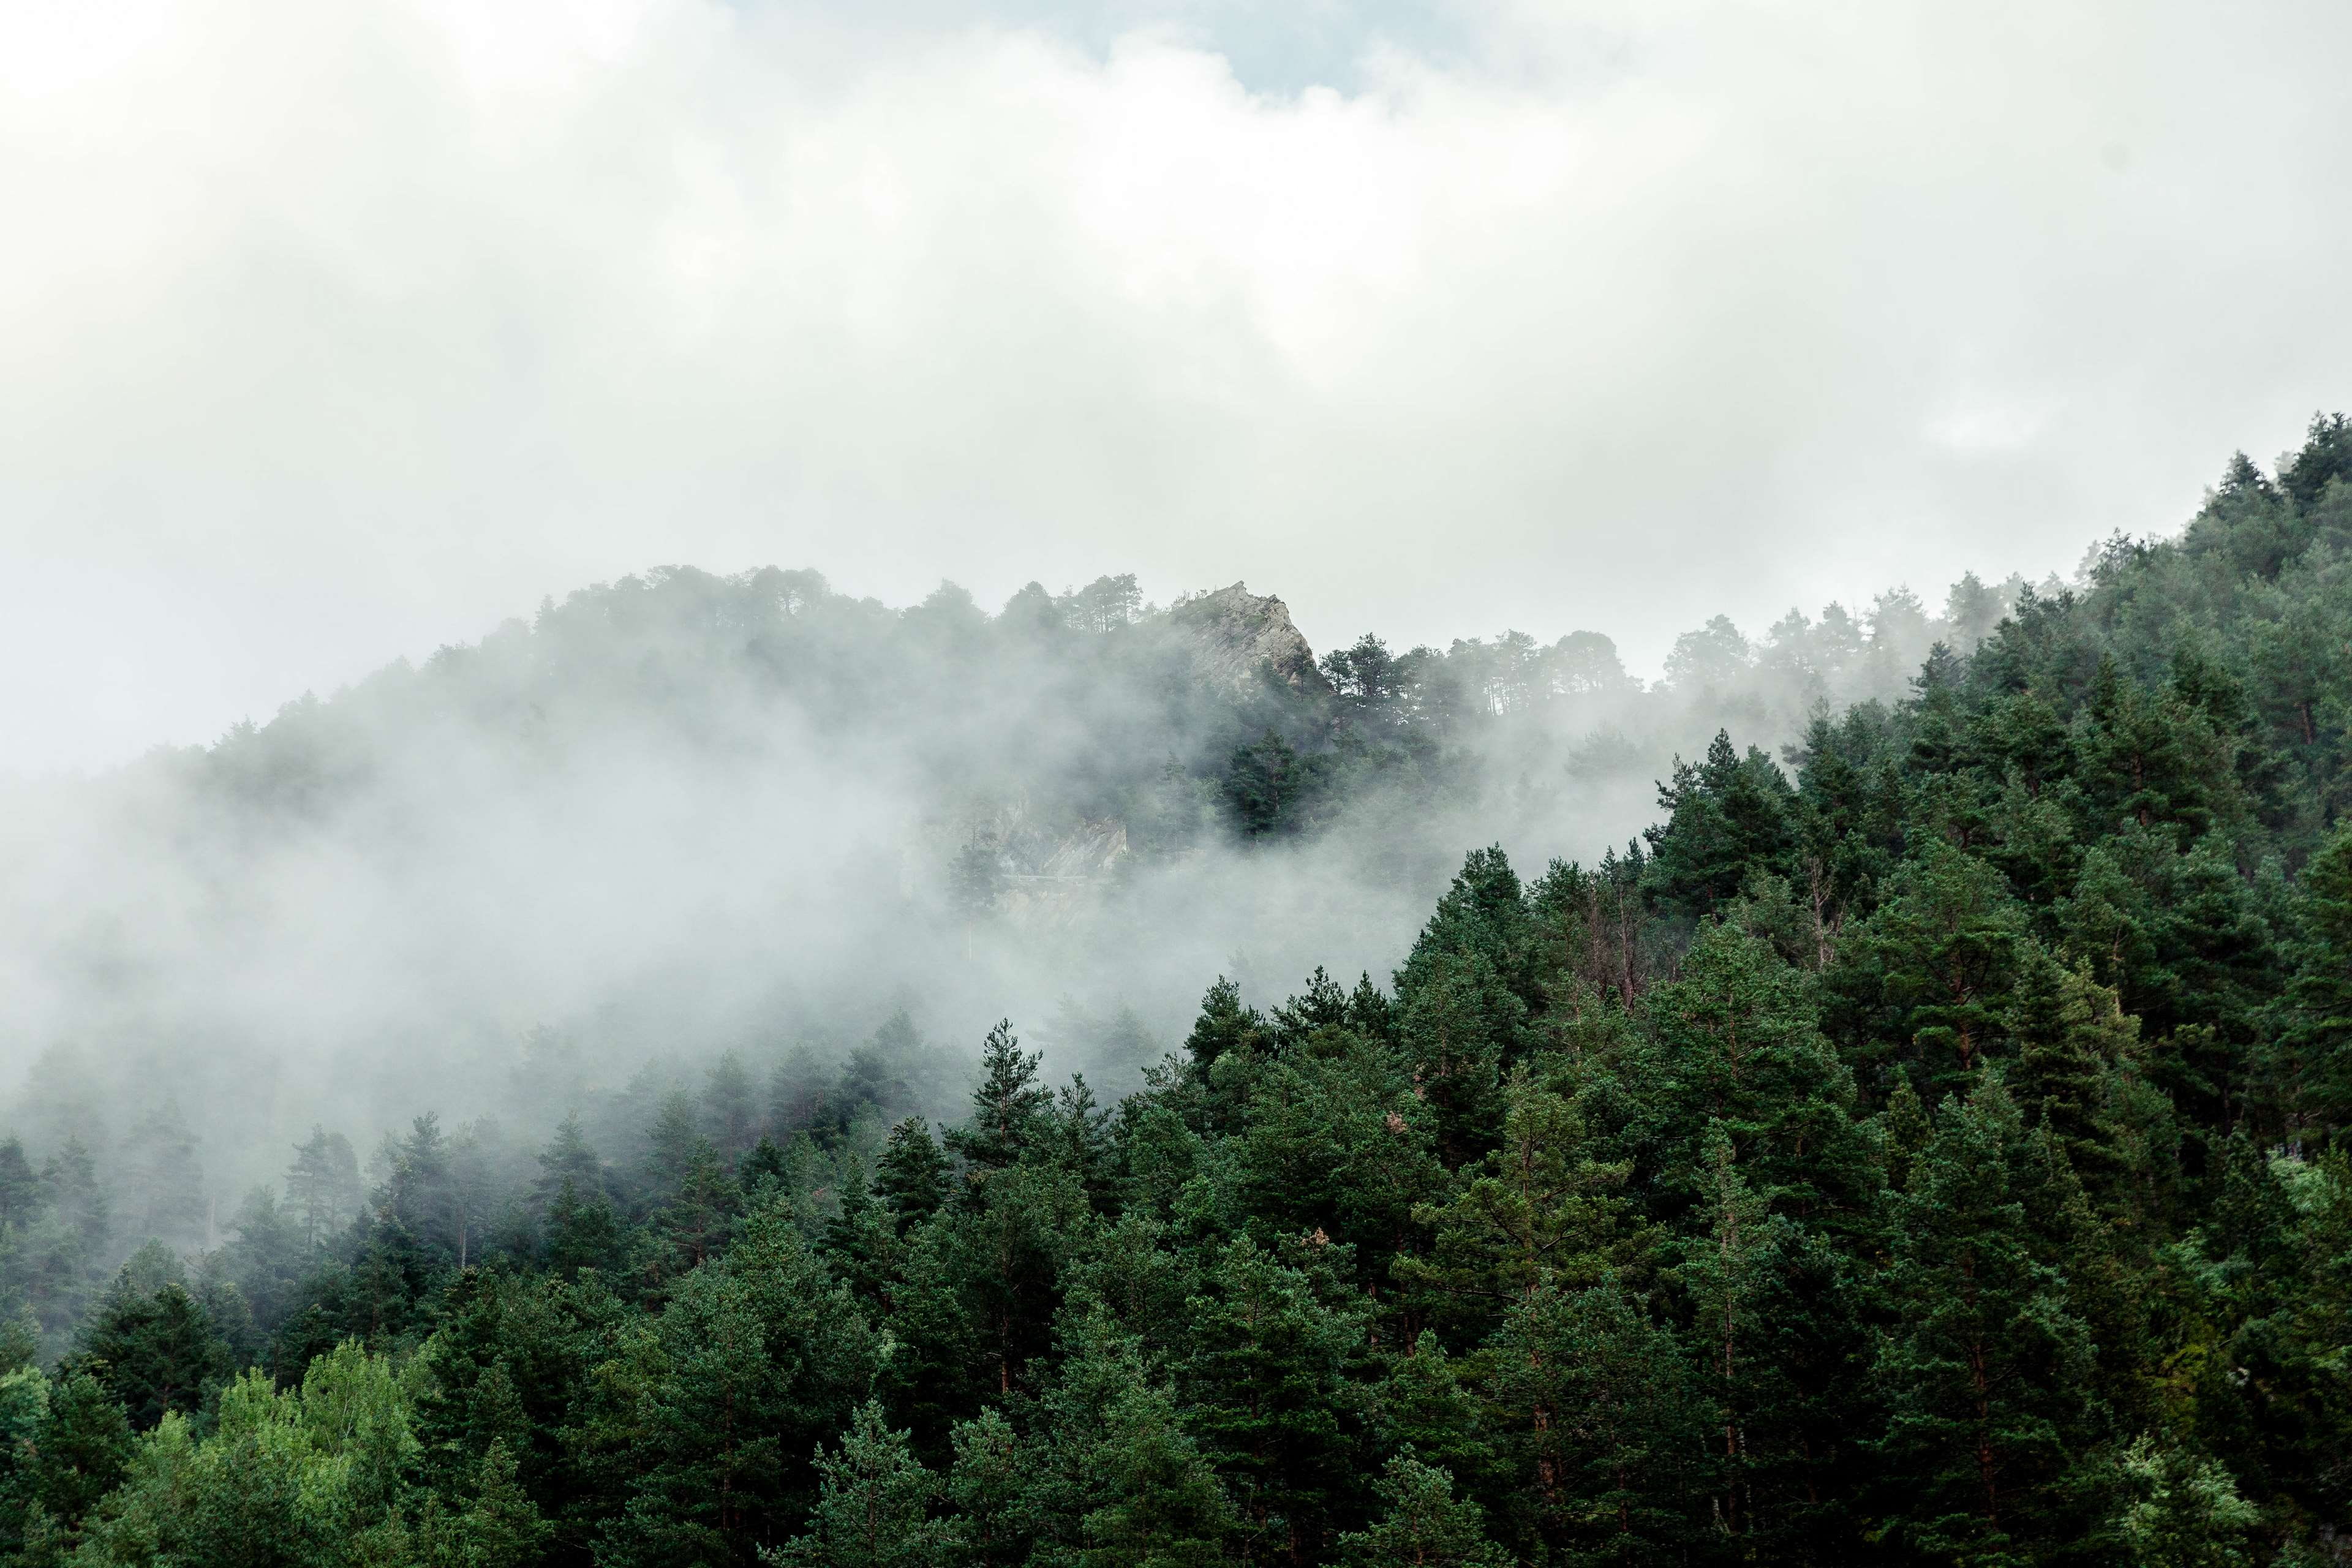 andorra, cloud, fog, forest, green, mountains, pyrenees, shower